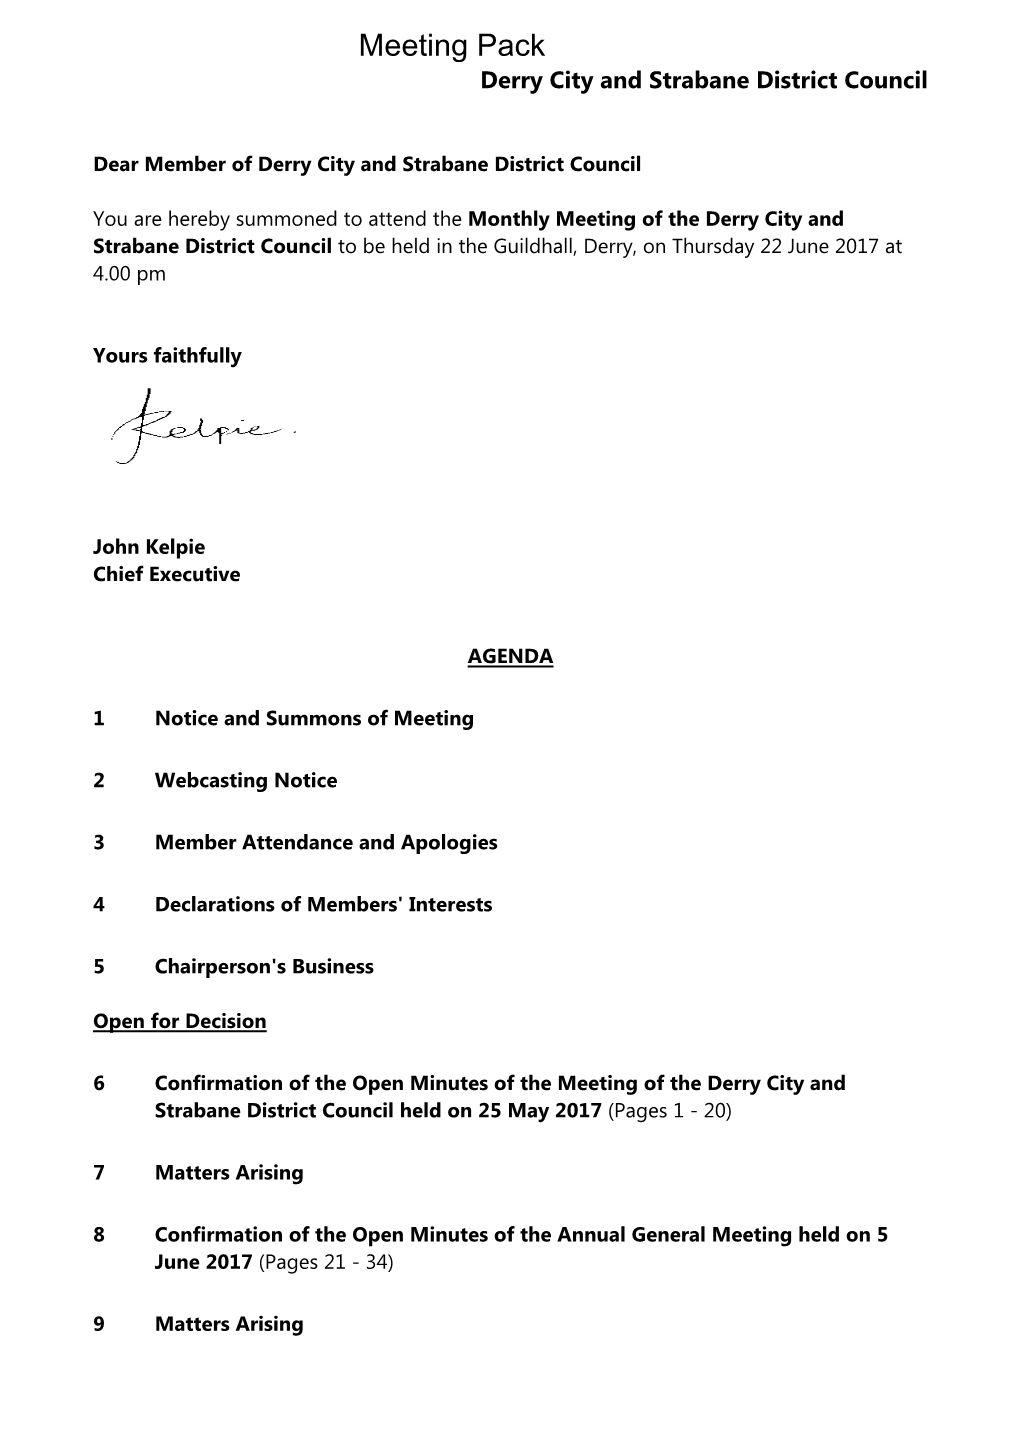 Agenda Document for Derry City and Strabane District Council (Open)